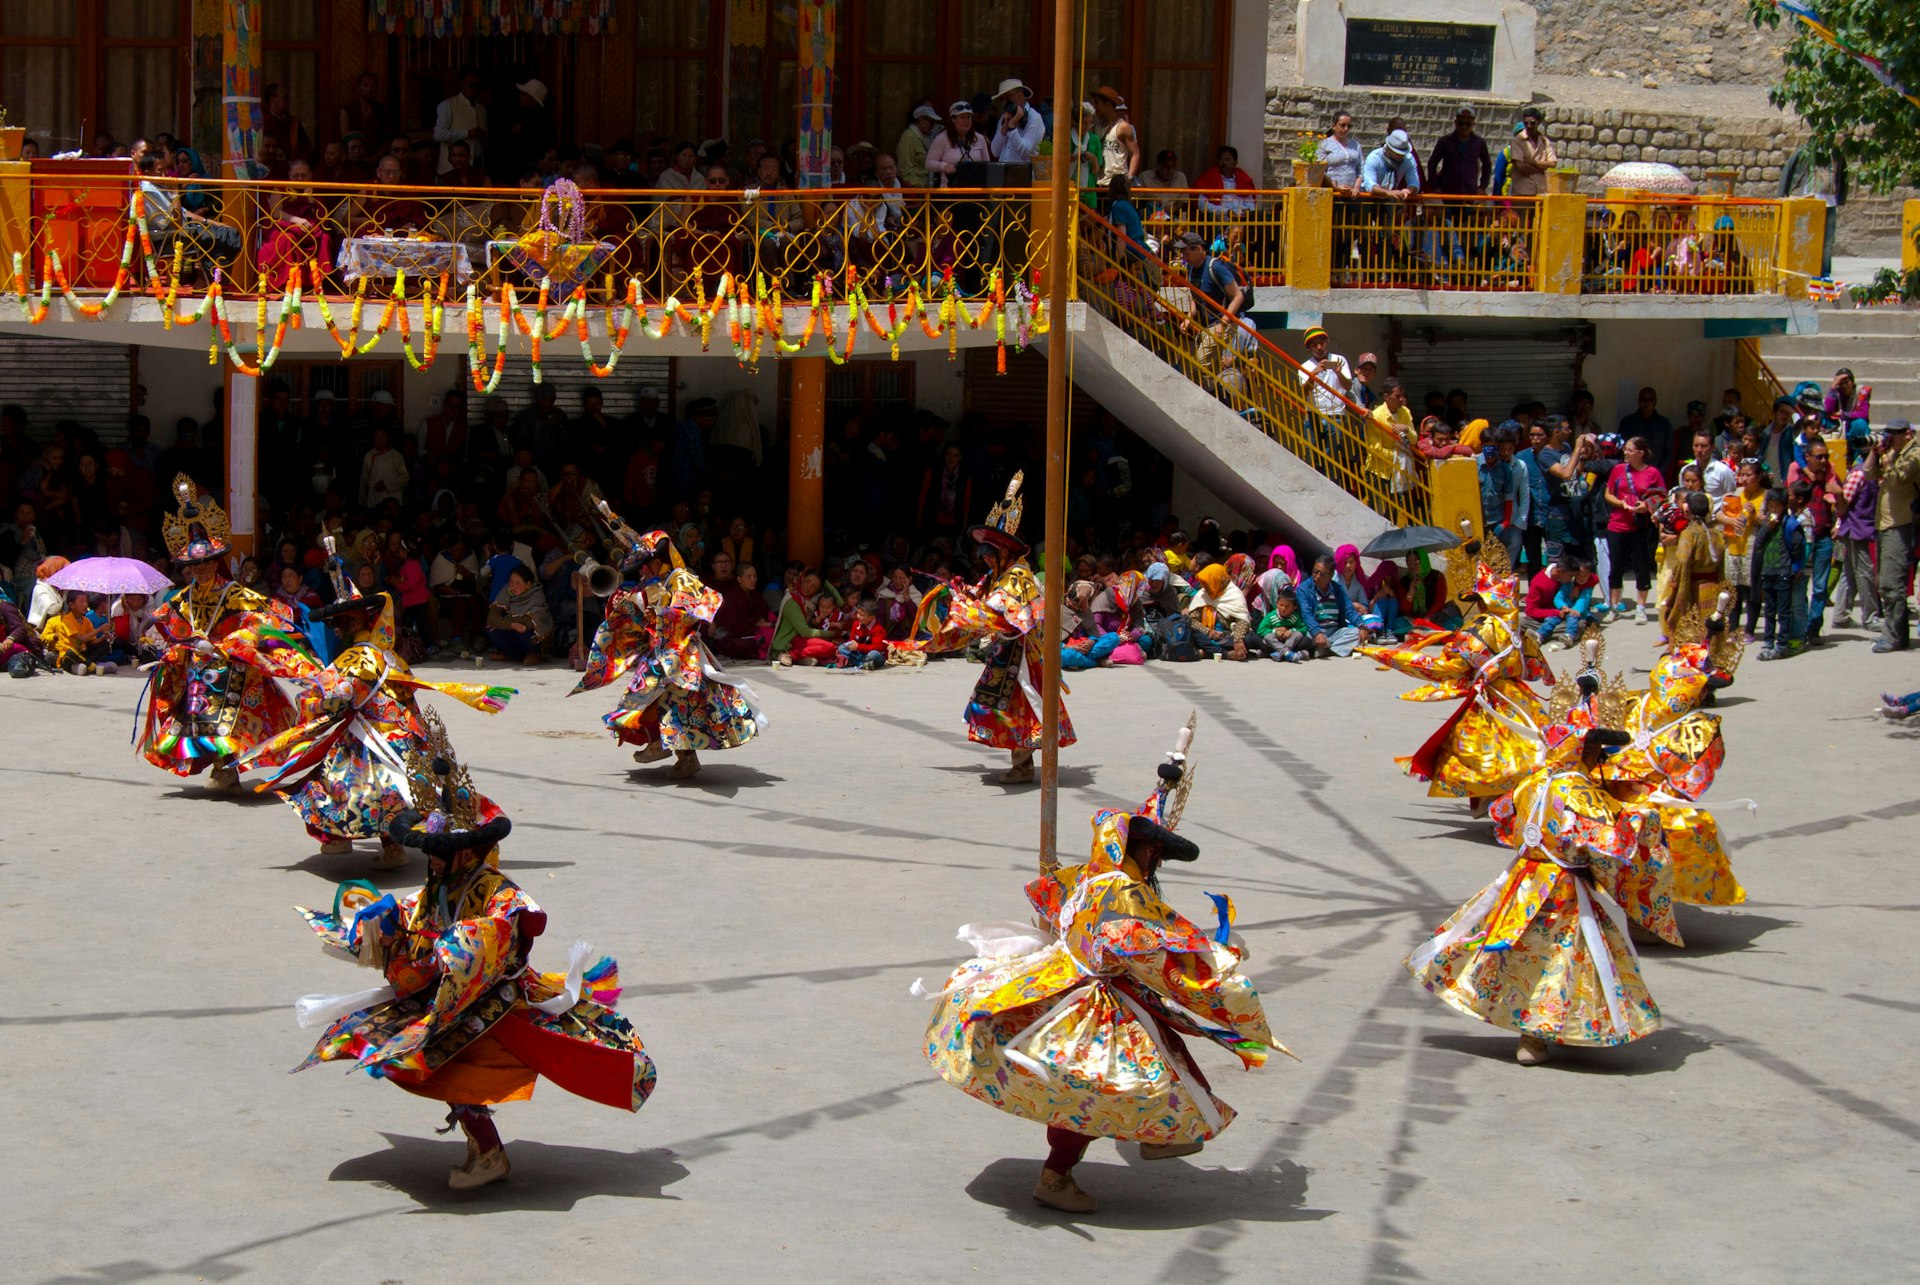 Monks in colourful costumes dance in the courtyard at Ki Gompa